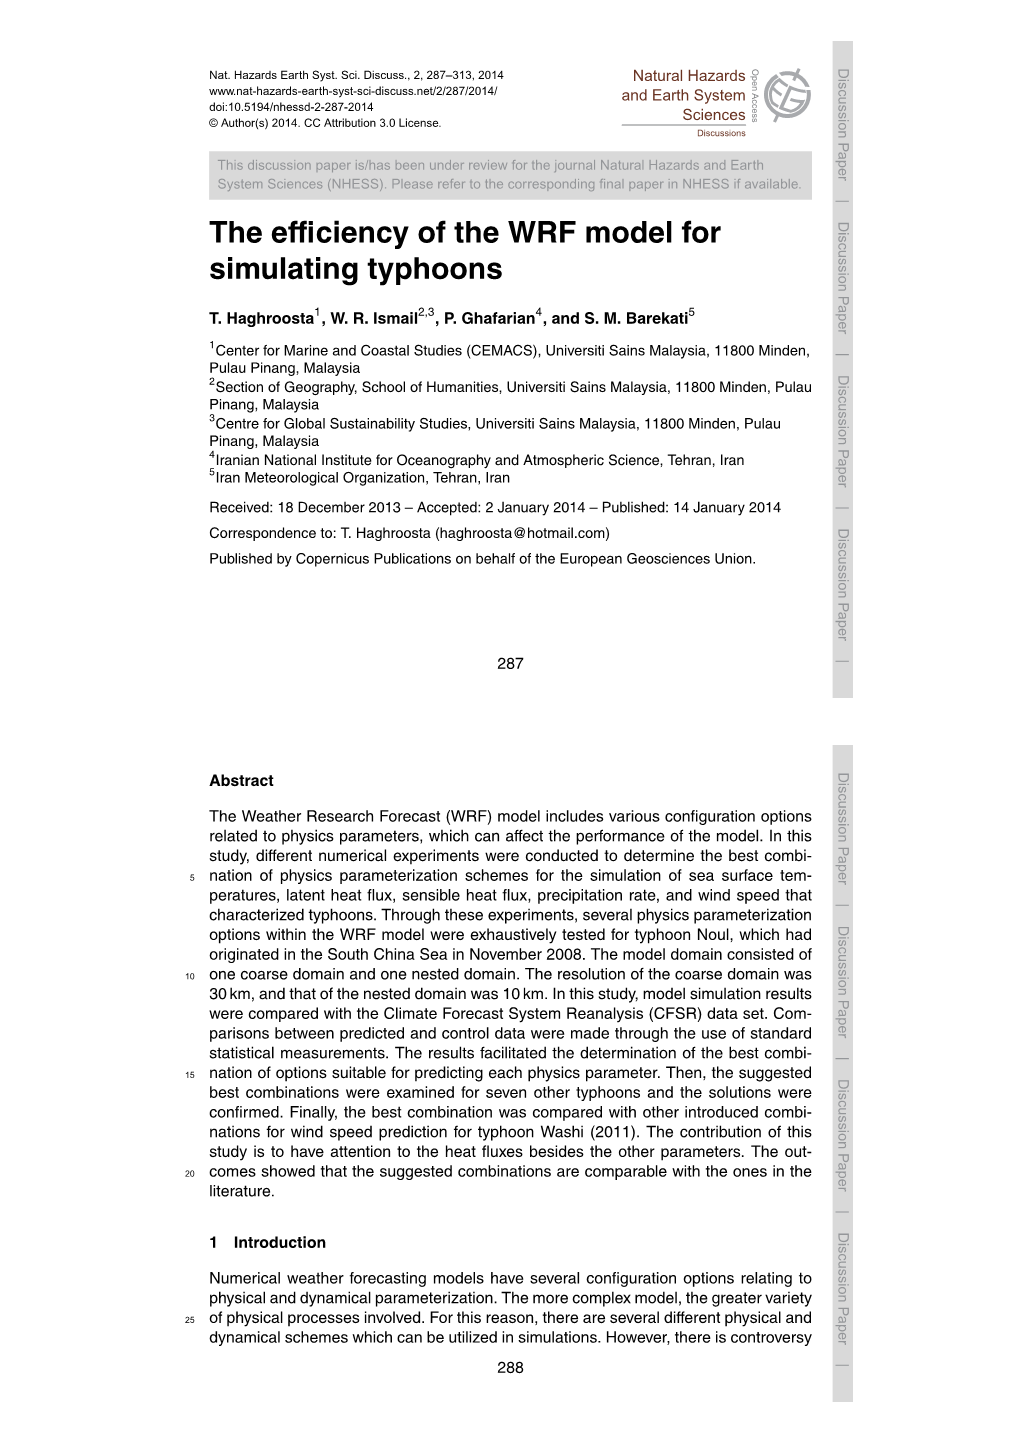 The Efficiency of the WRF Model for Simulating Typhoons